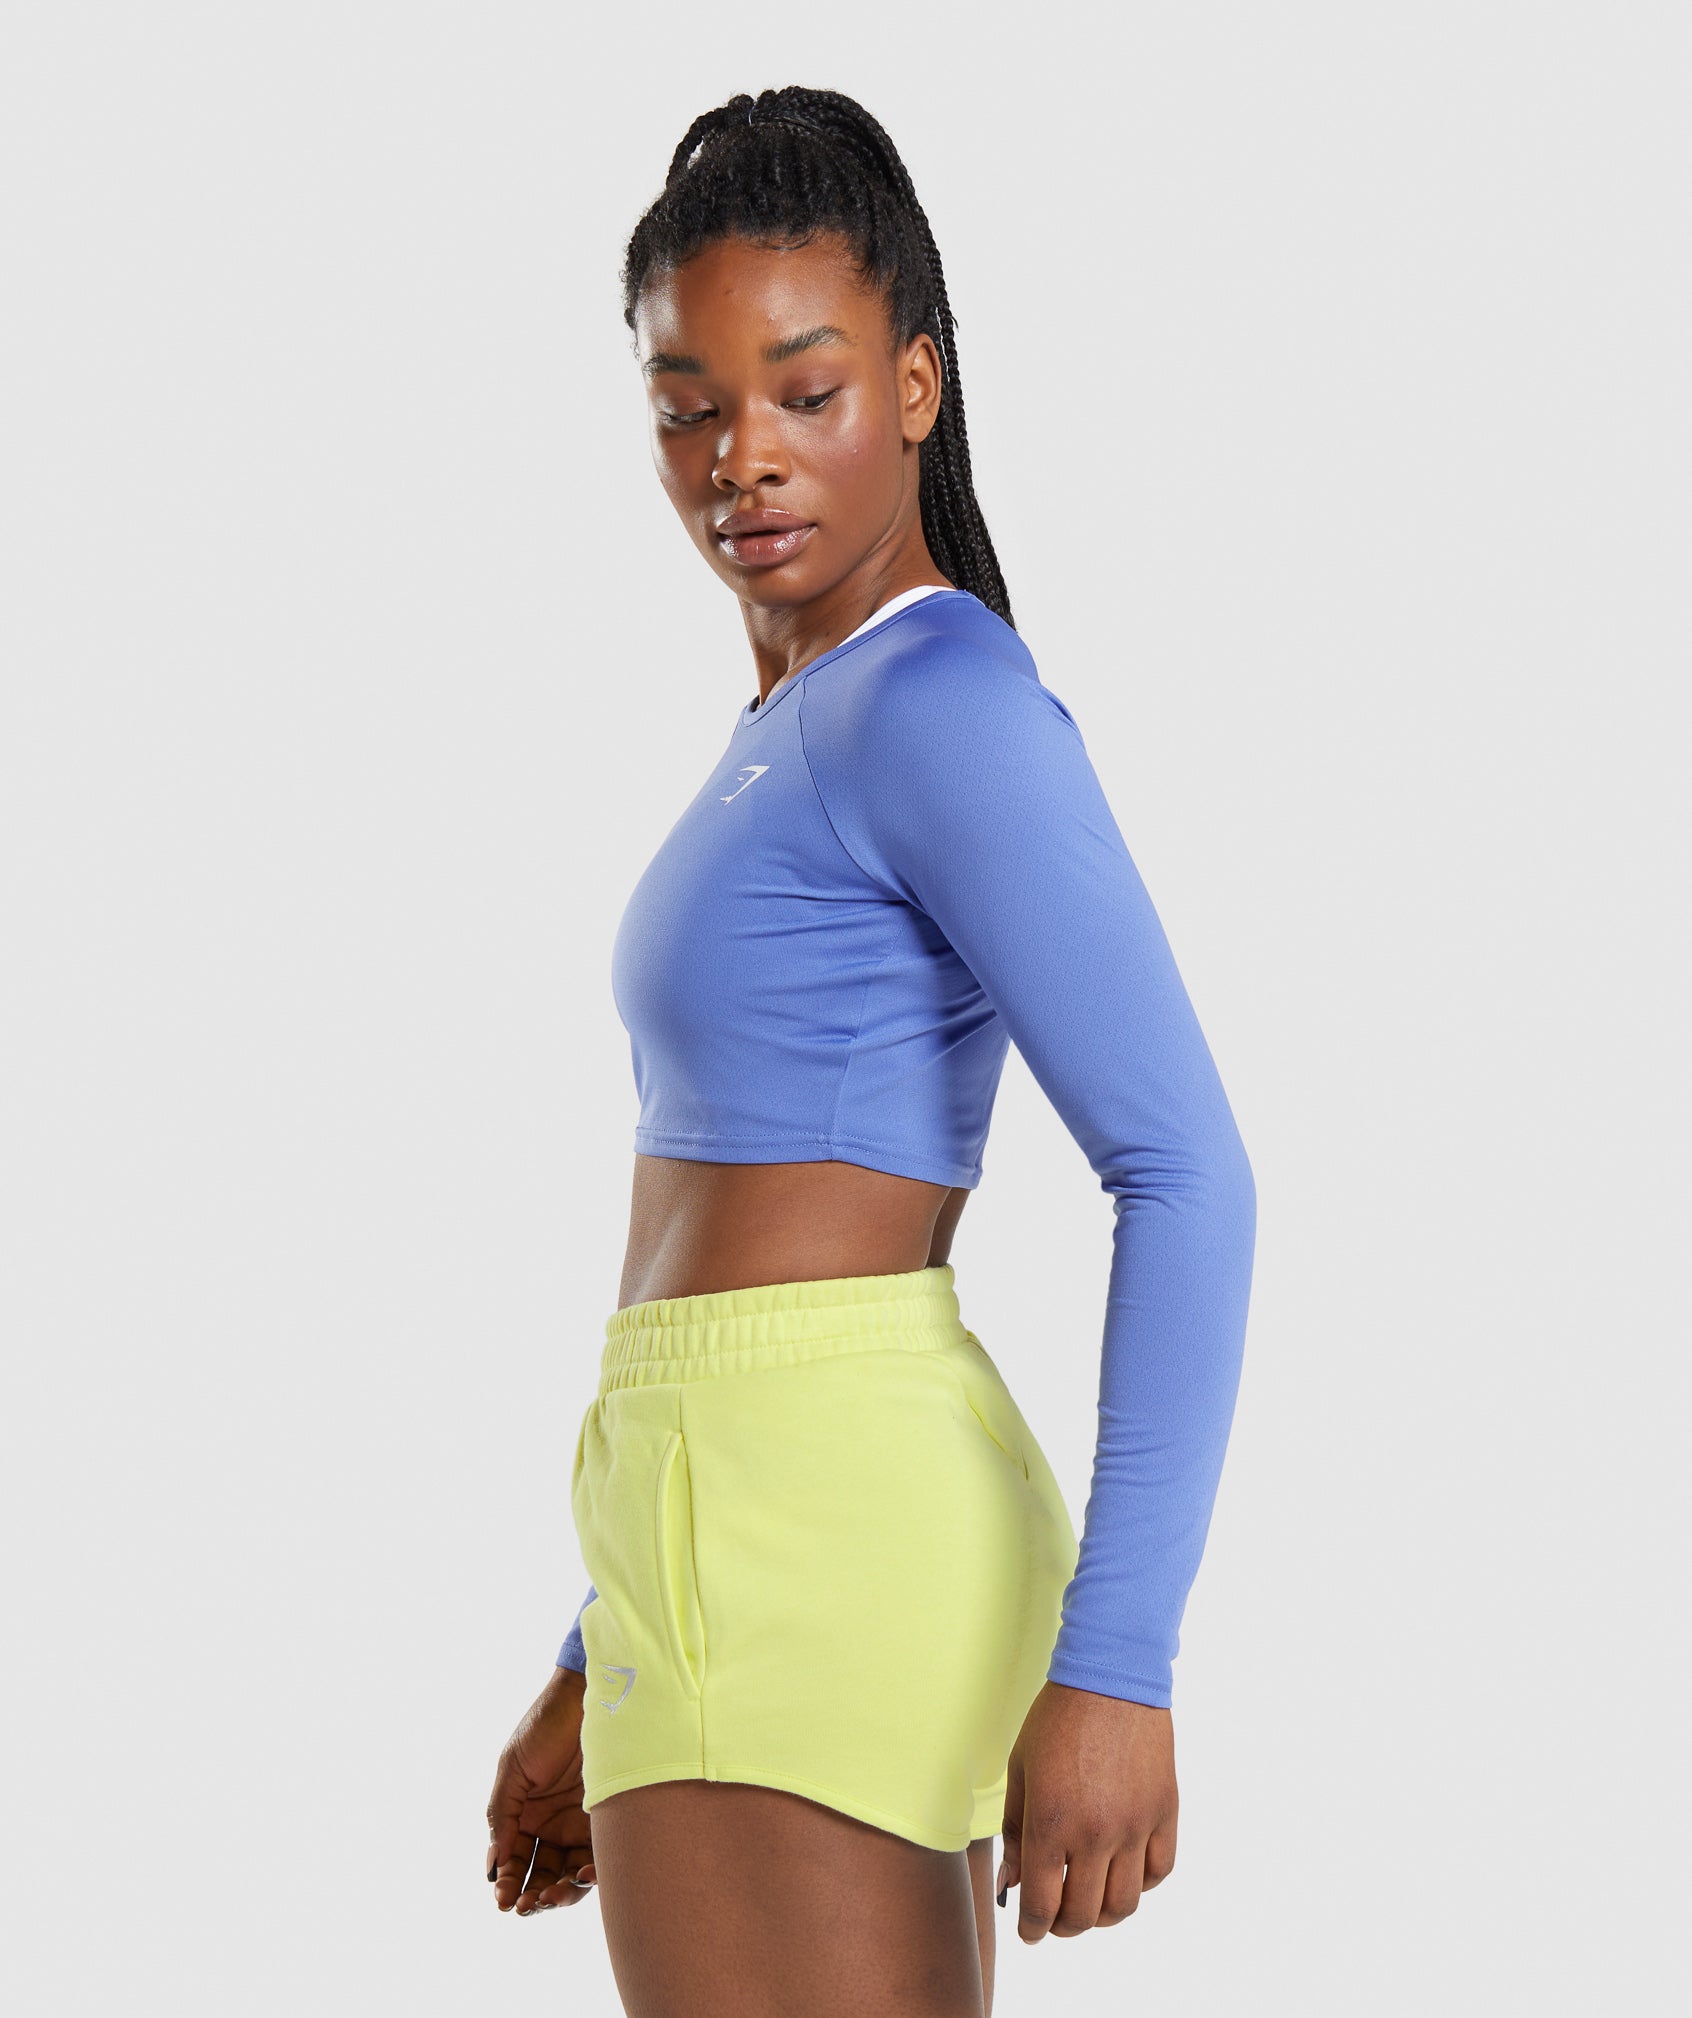 Gymshark Whitney Simmons Long Sleeve Crop Top Beautiful Blue Small S BNWT